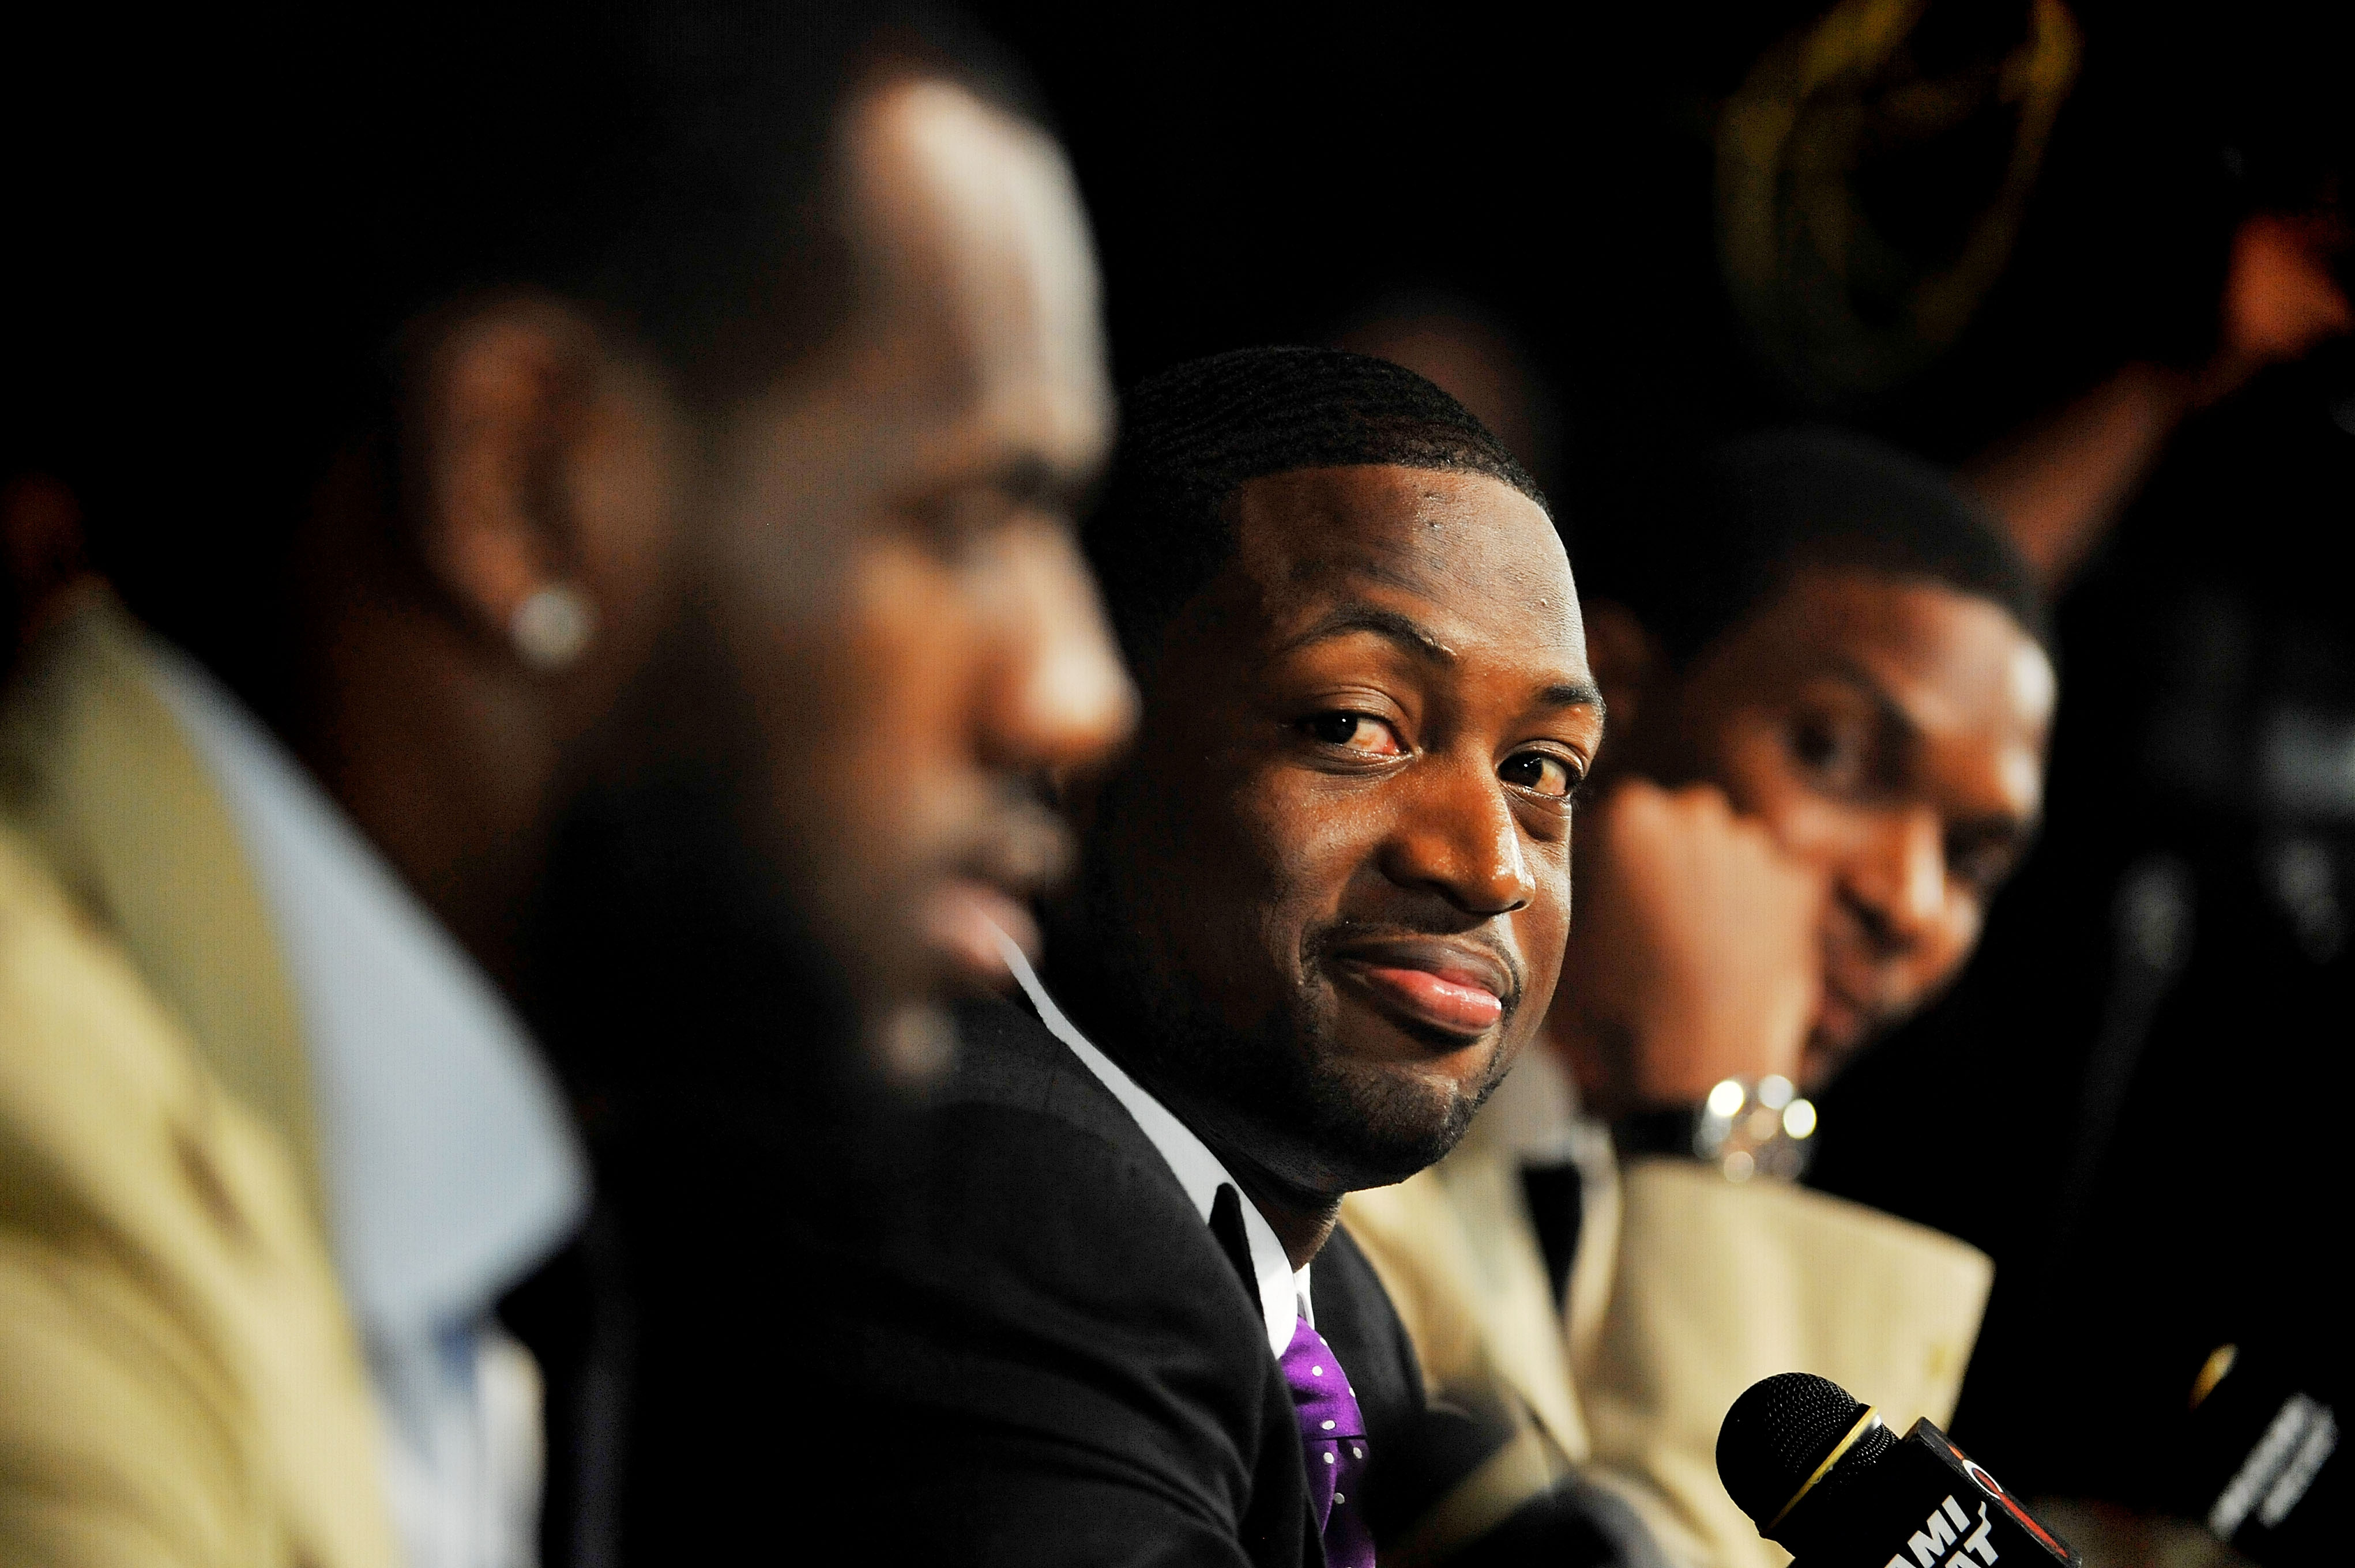 MIAMI - JULY 09:  Dwyane Wade #3 (C) of the Miami Heat talks during a press conference after a welcome party at American Airlines Arena on July 9, 2010 in Miami, Florida.  (Photo by Doug Benc/Getty Images)